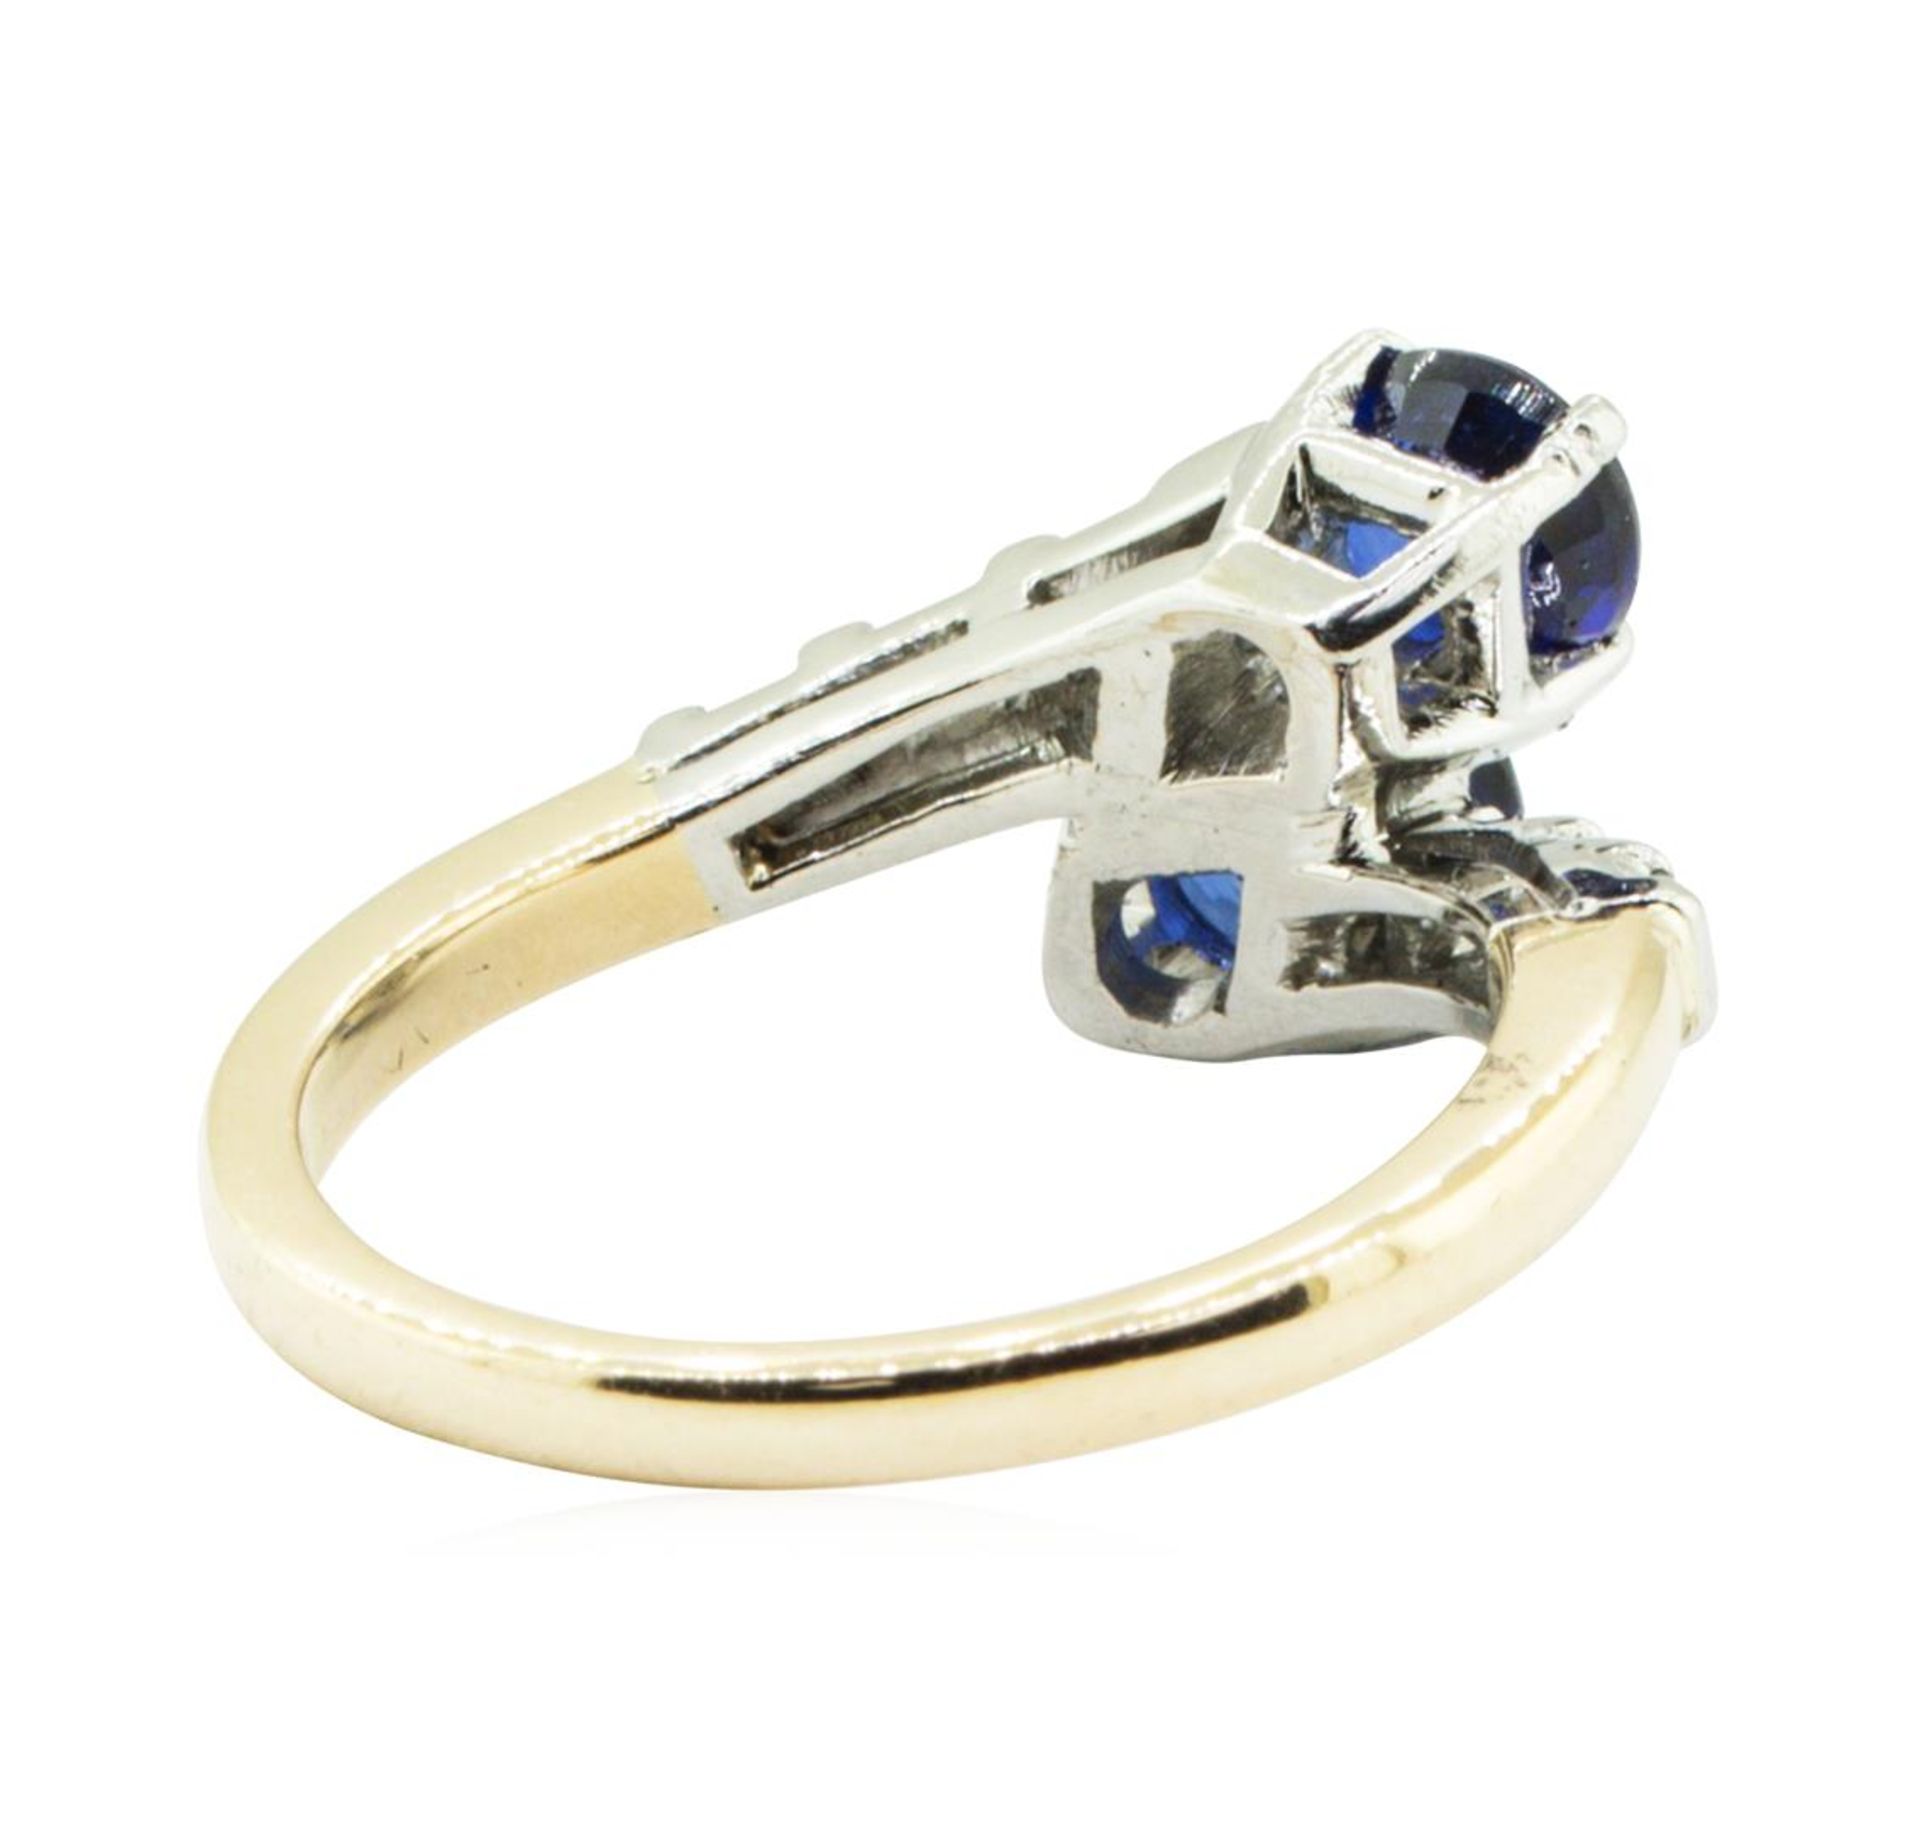 2.07 ctw Oval Brilliant Blue Sapphire Ring - 14KT Yellow Gold - Image 3 of 5